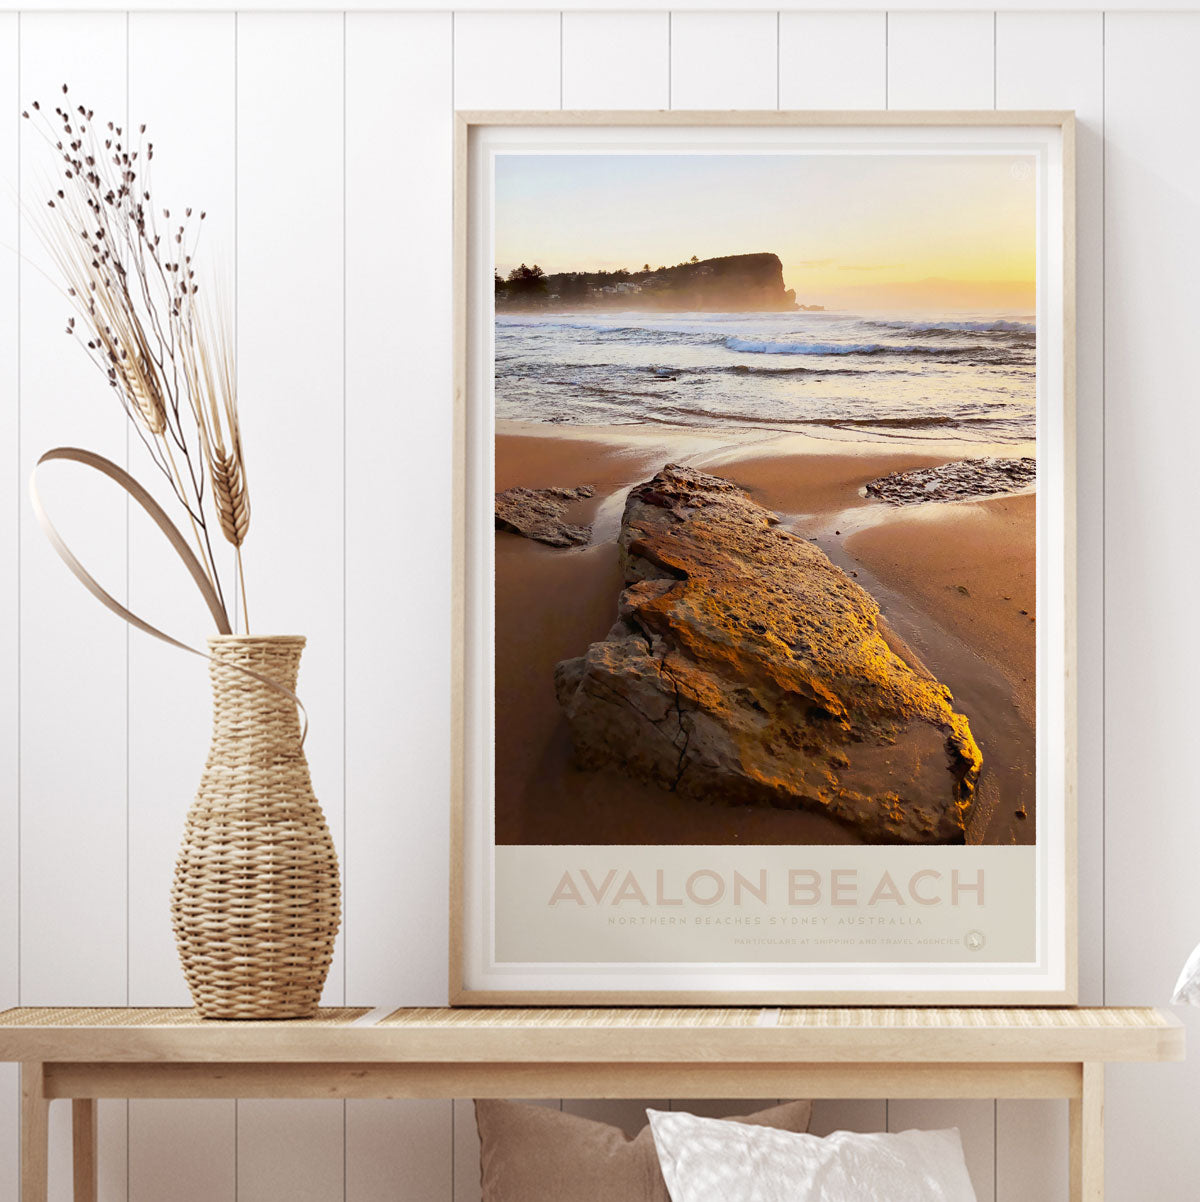 Avalon Beach vintage retro poster from Places we Luv